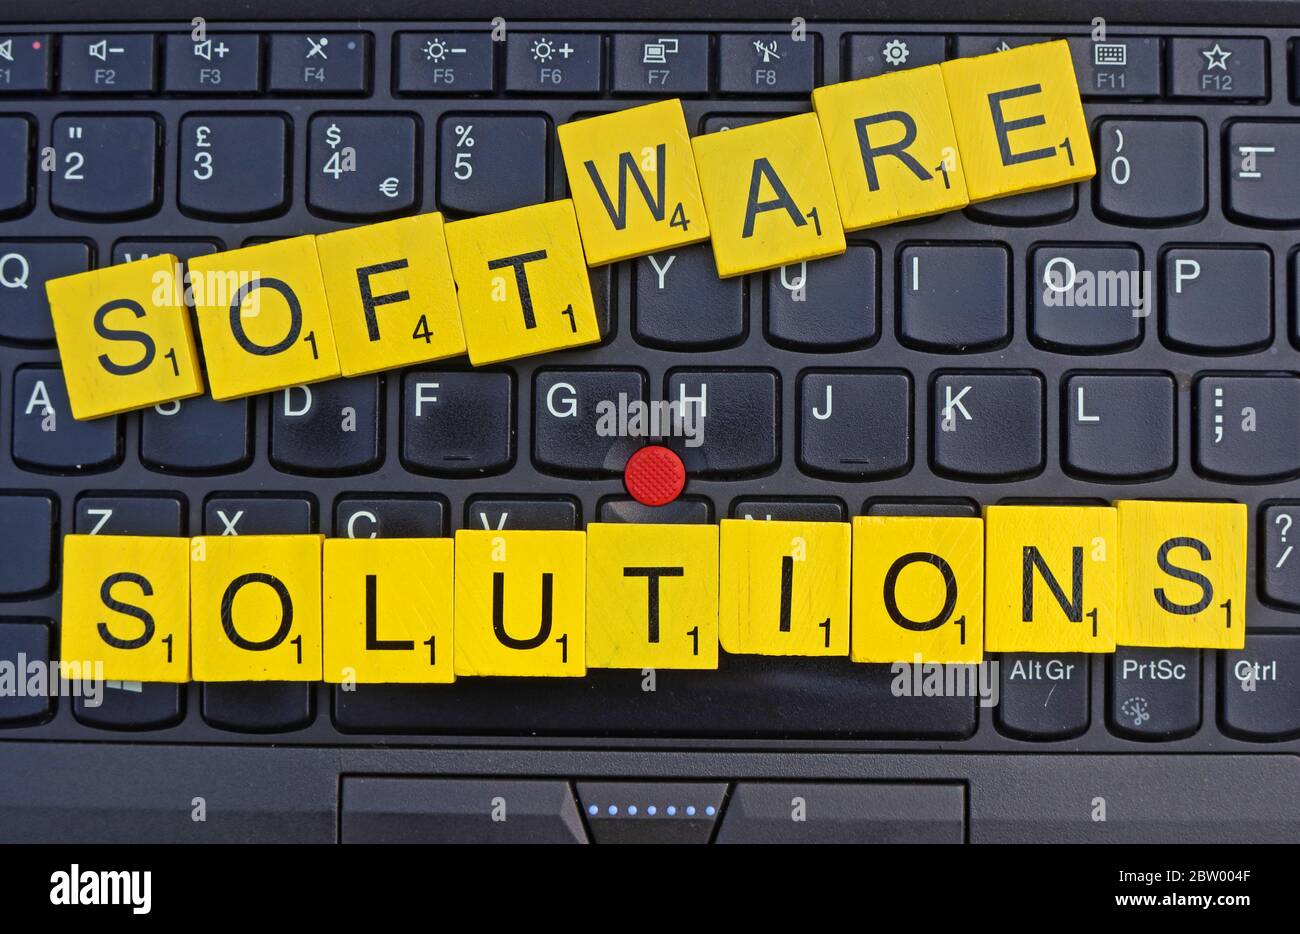 Software Solutions, spelt out in scrabble letters on a keyboard, software houses,Enterprise Software Solutions, business software,SME Solutions Stock Photo